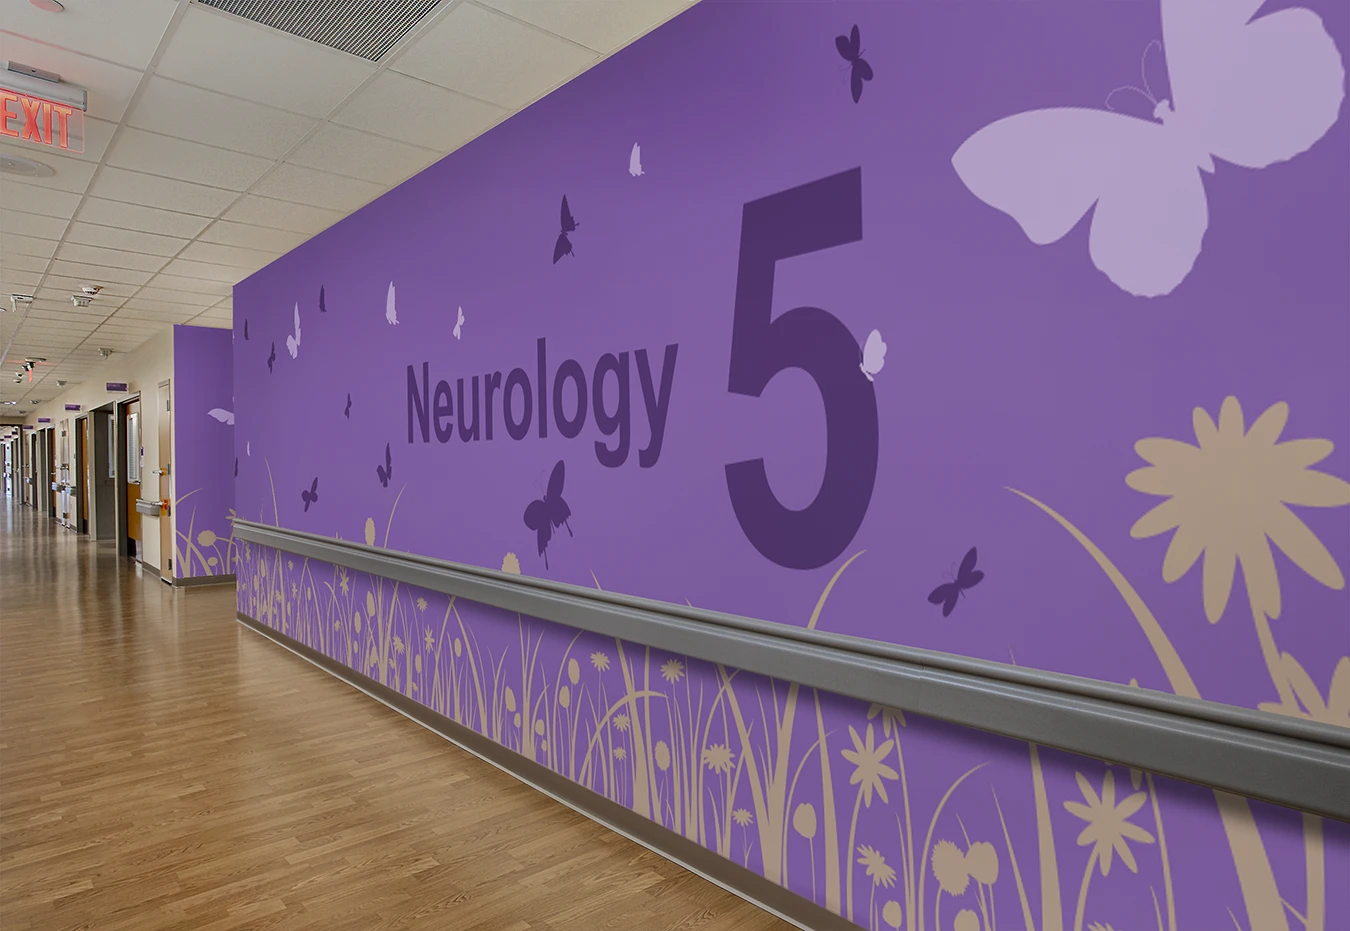 Integrated art and wayfinding signage in a healthcare setting